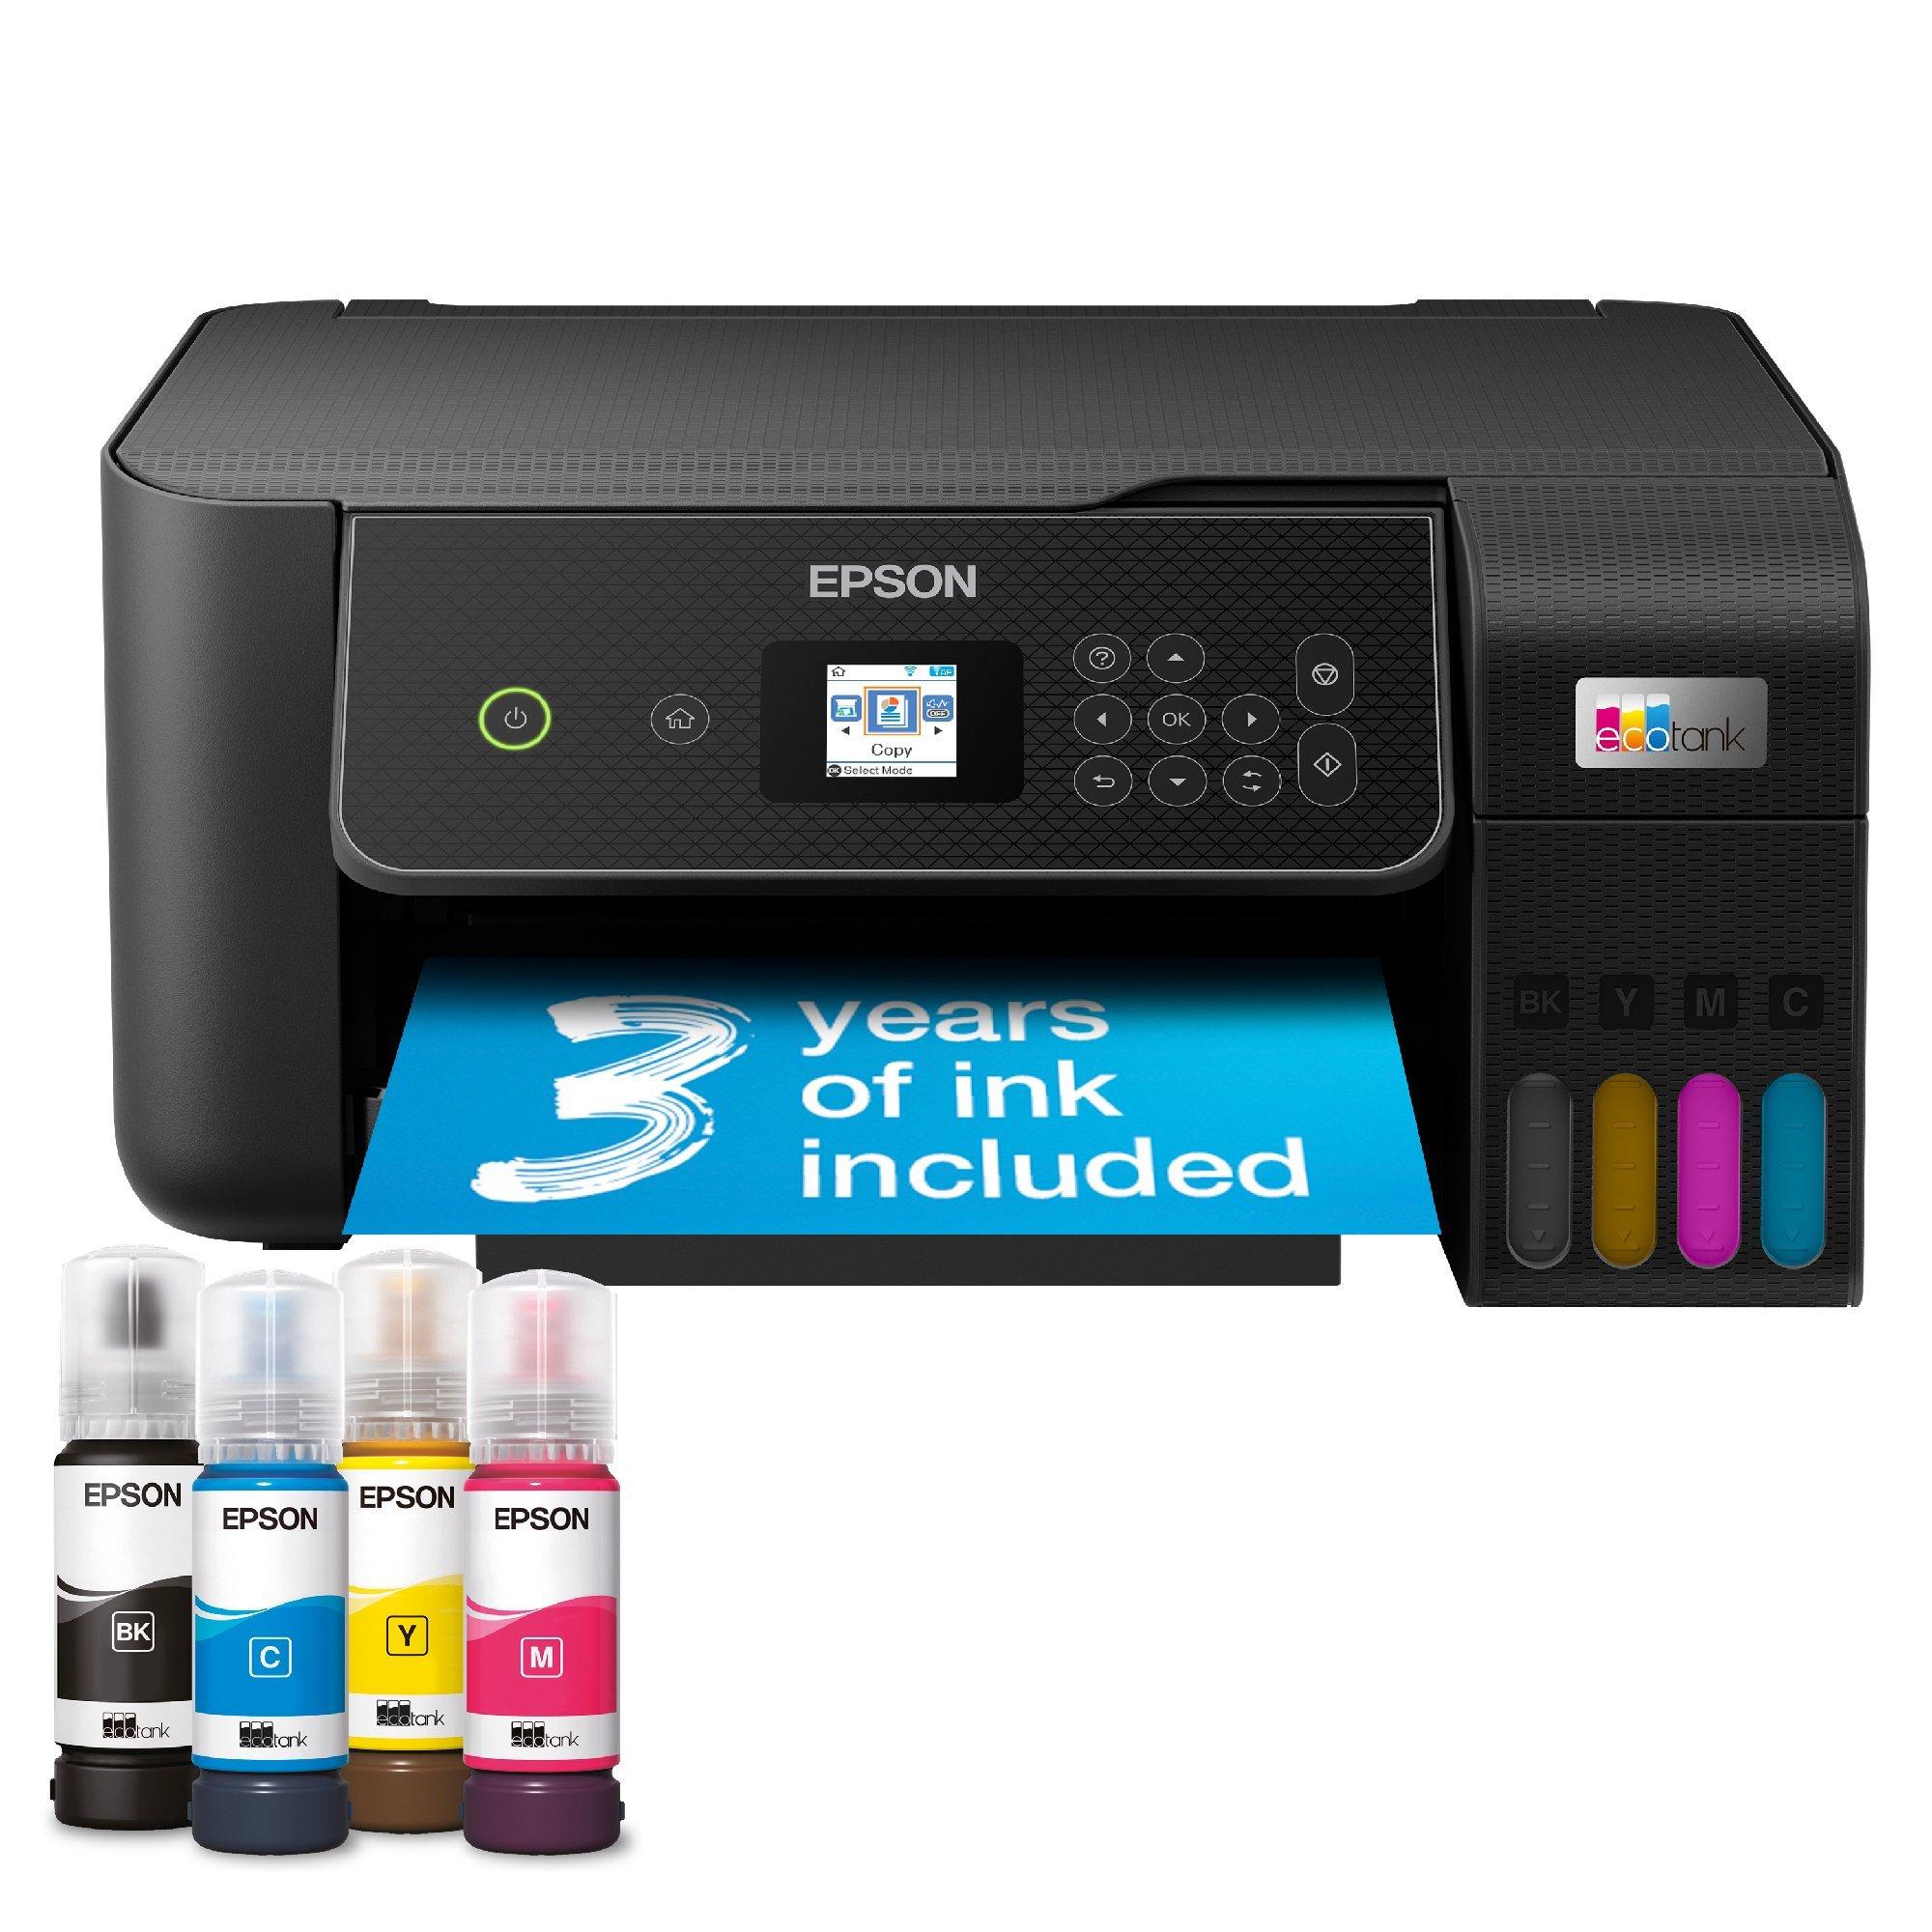 Ecotank Et 2870 A4 Multifunction Wi Fi Ink Tank Printer With Up To 3 Years Of Ink Included 2782